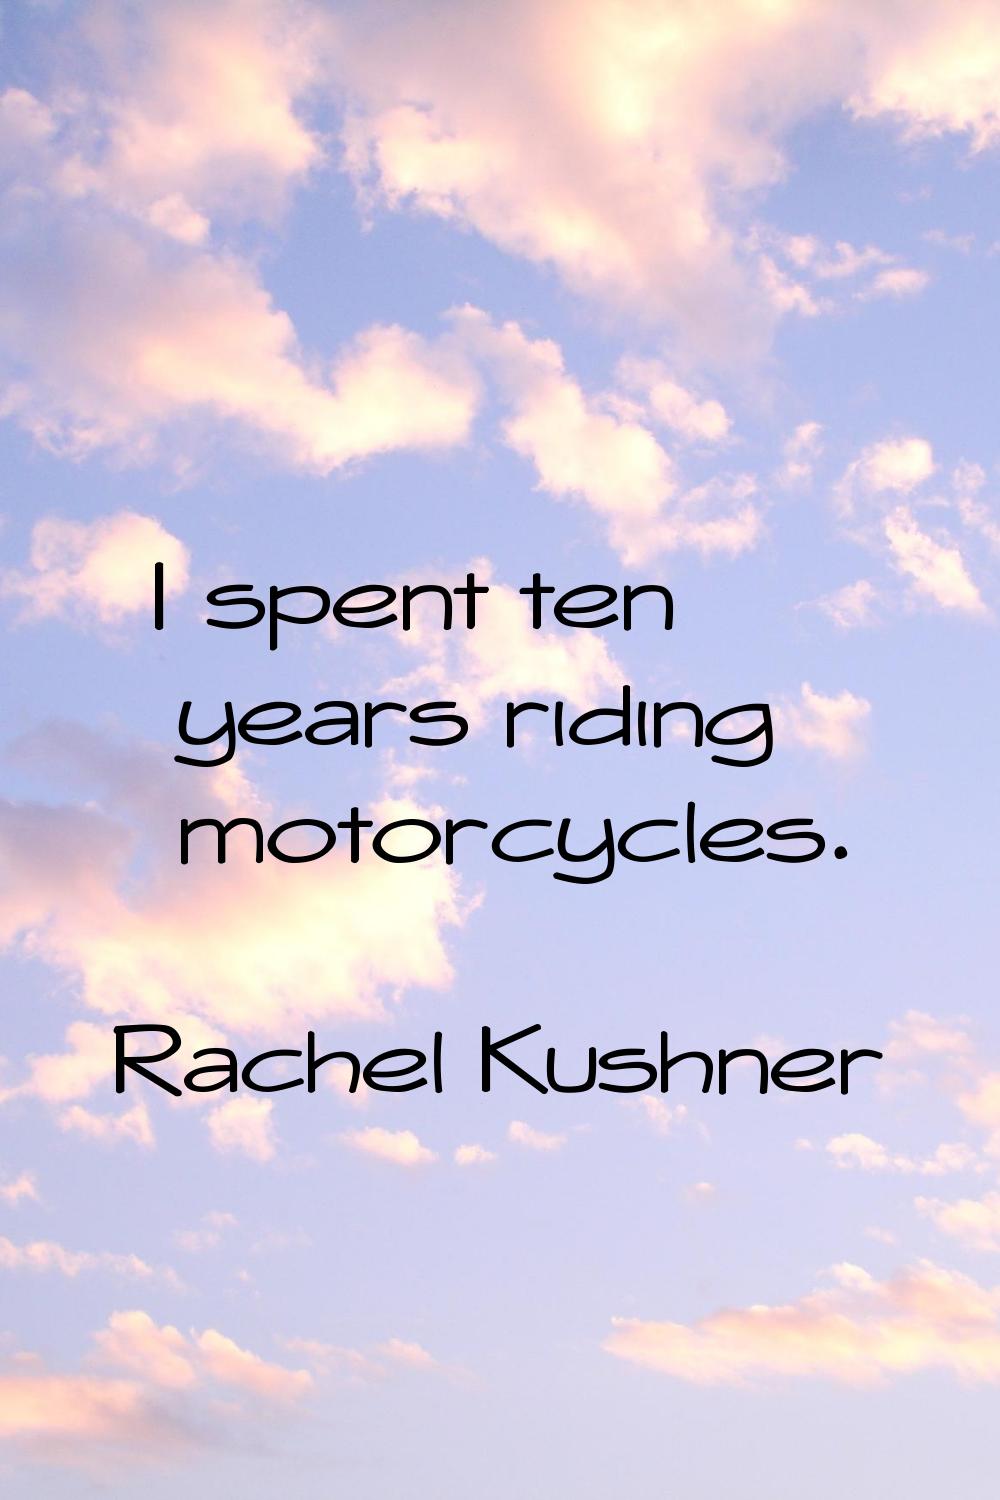 I spent ten years riding motorcycles.